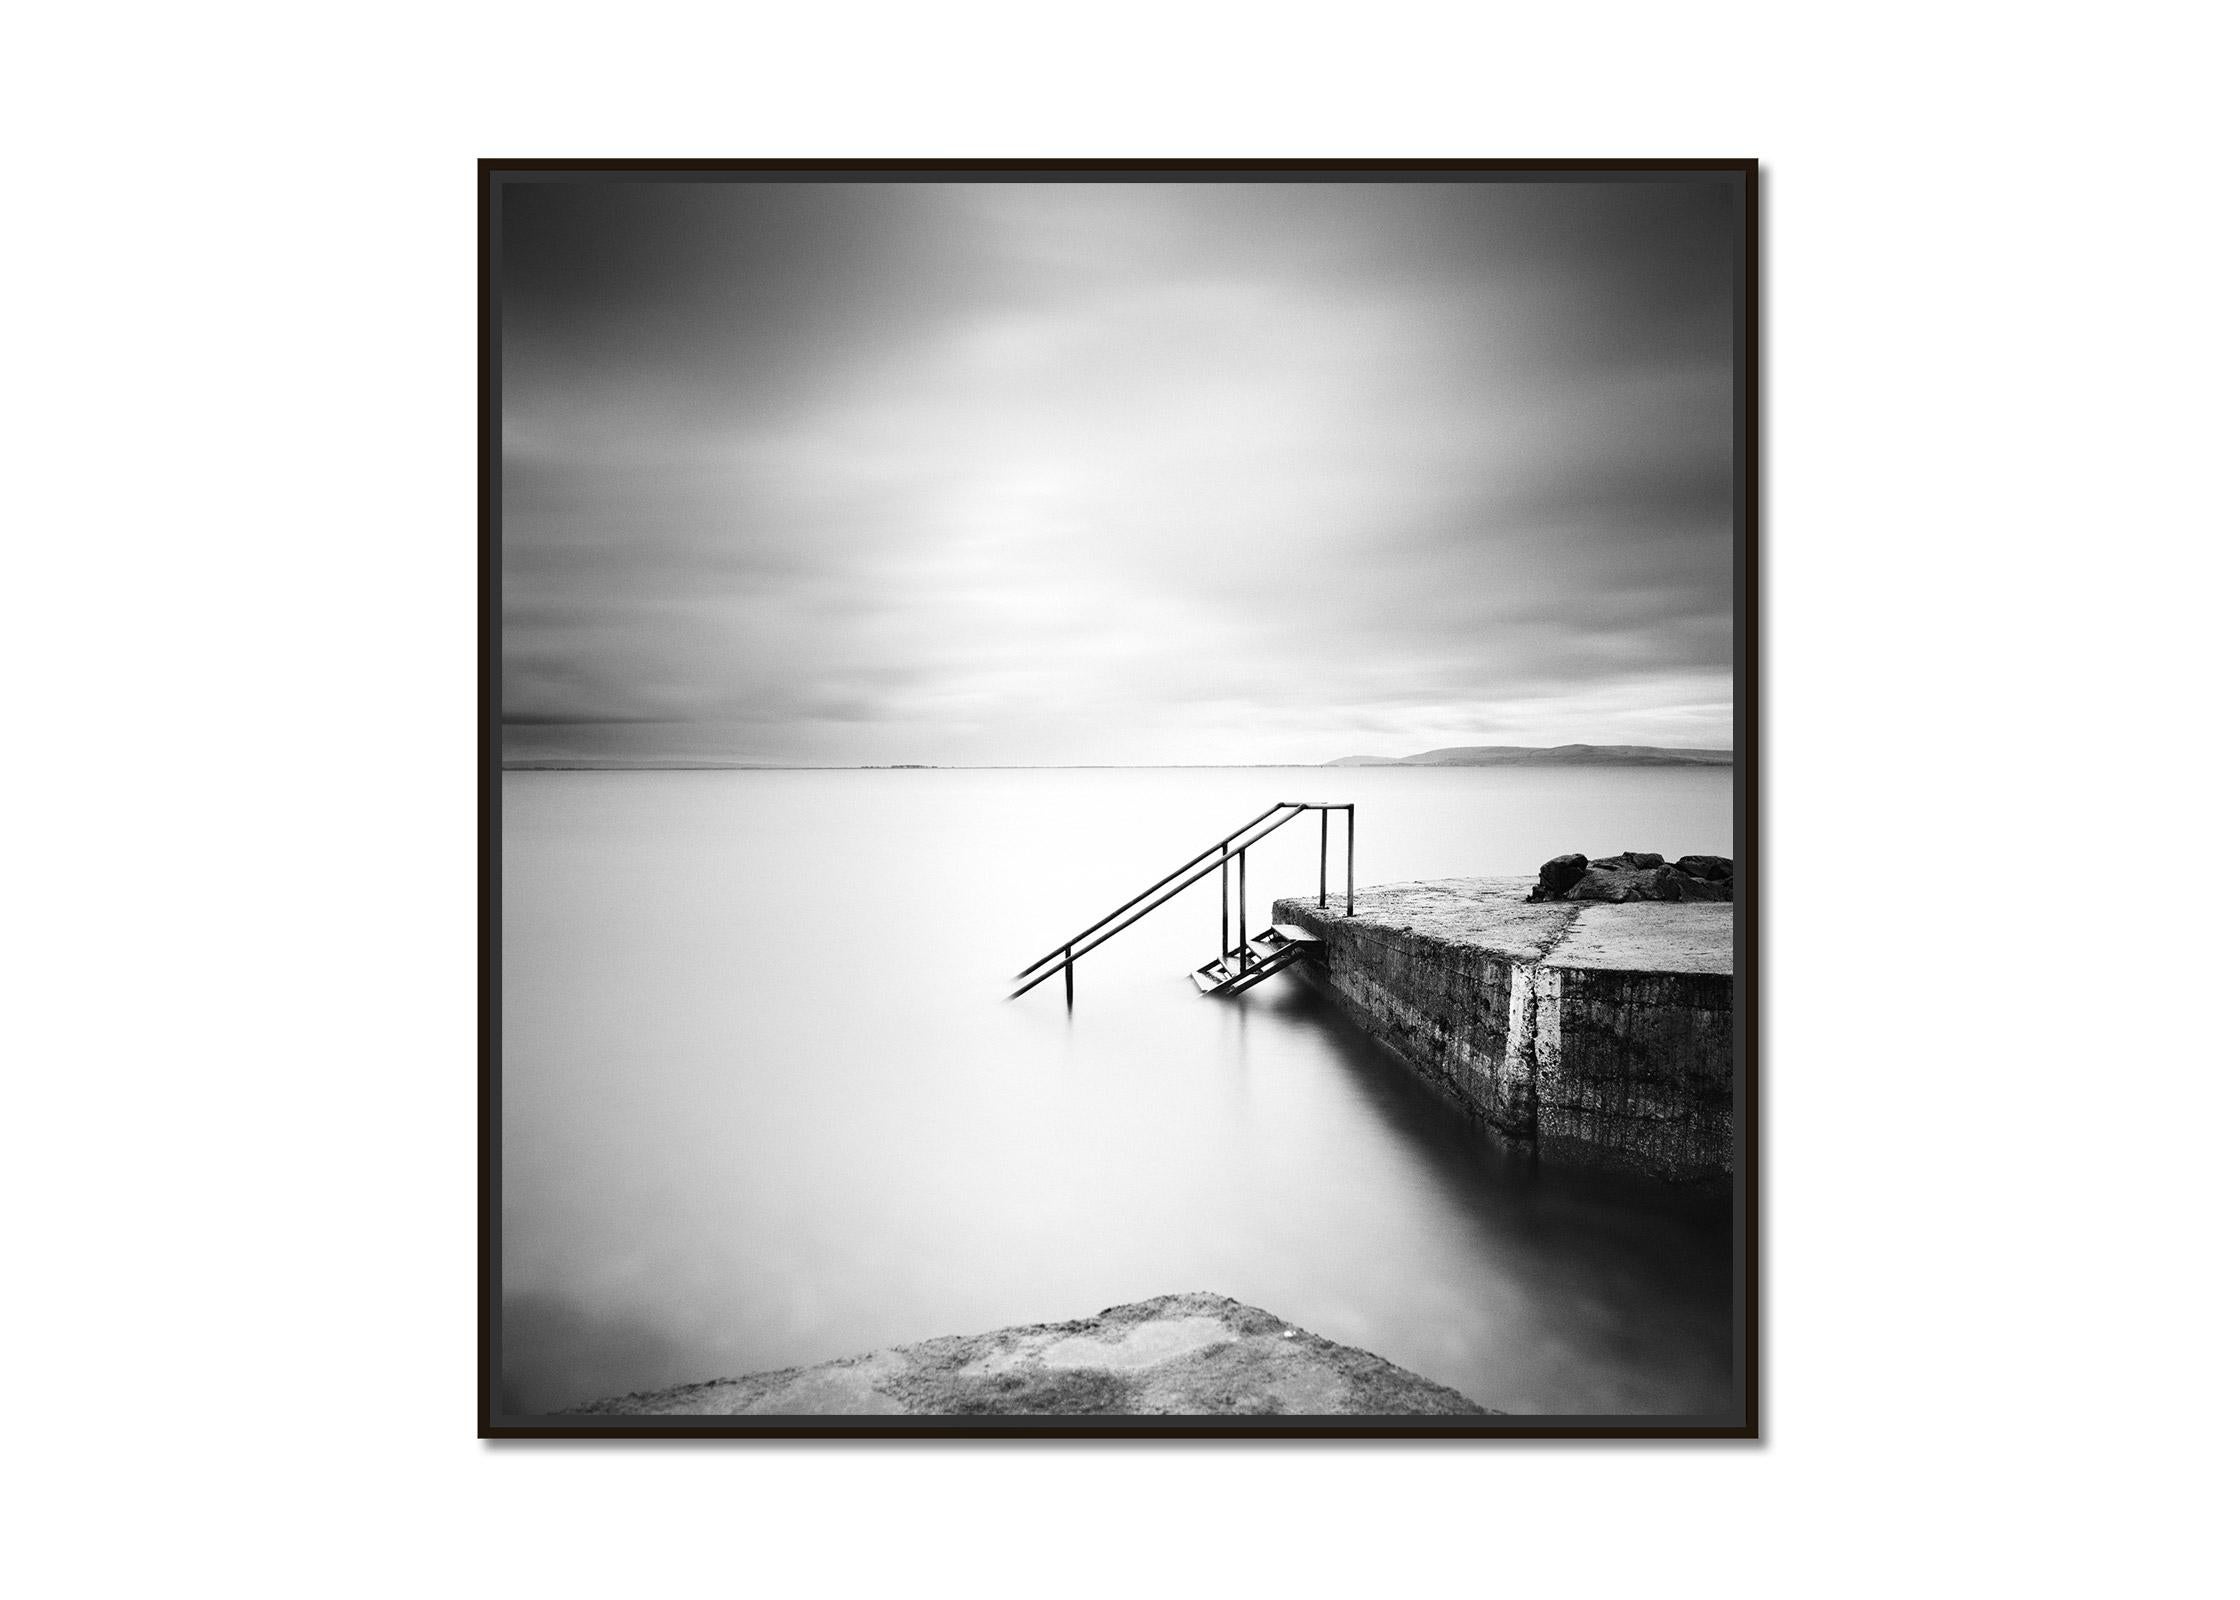 Four Steps Down, Ireland, minimalist black and white photography, landscape - Photograph by Gerald Berghammer